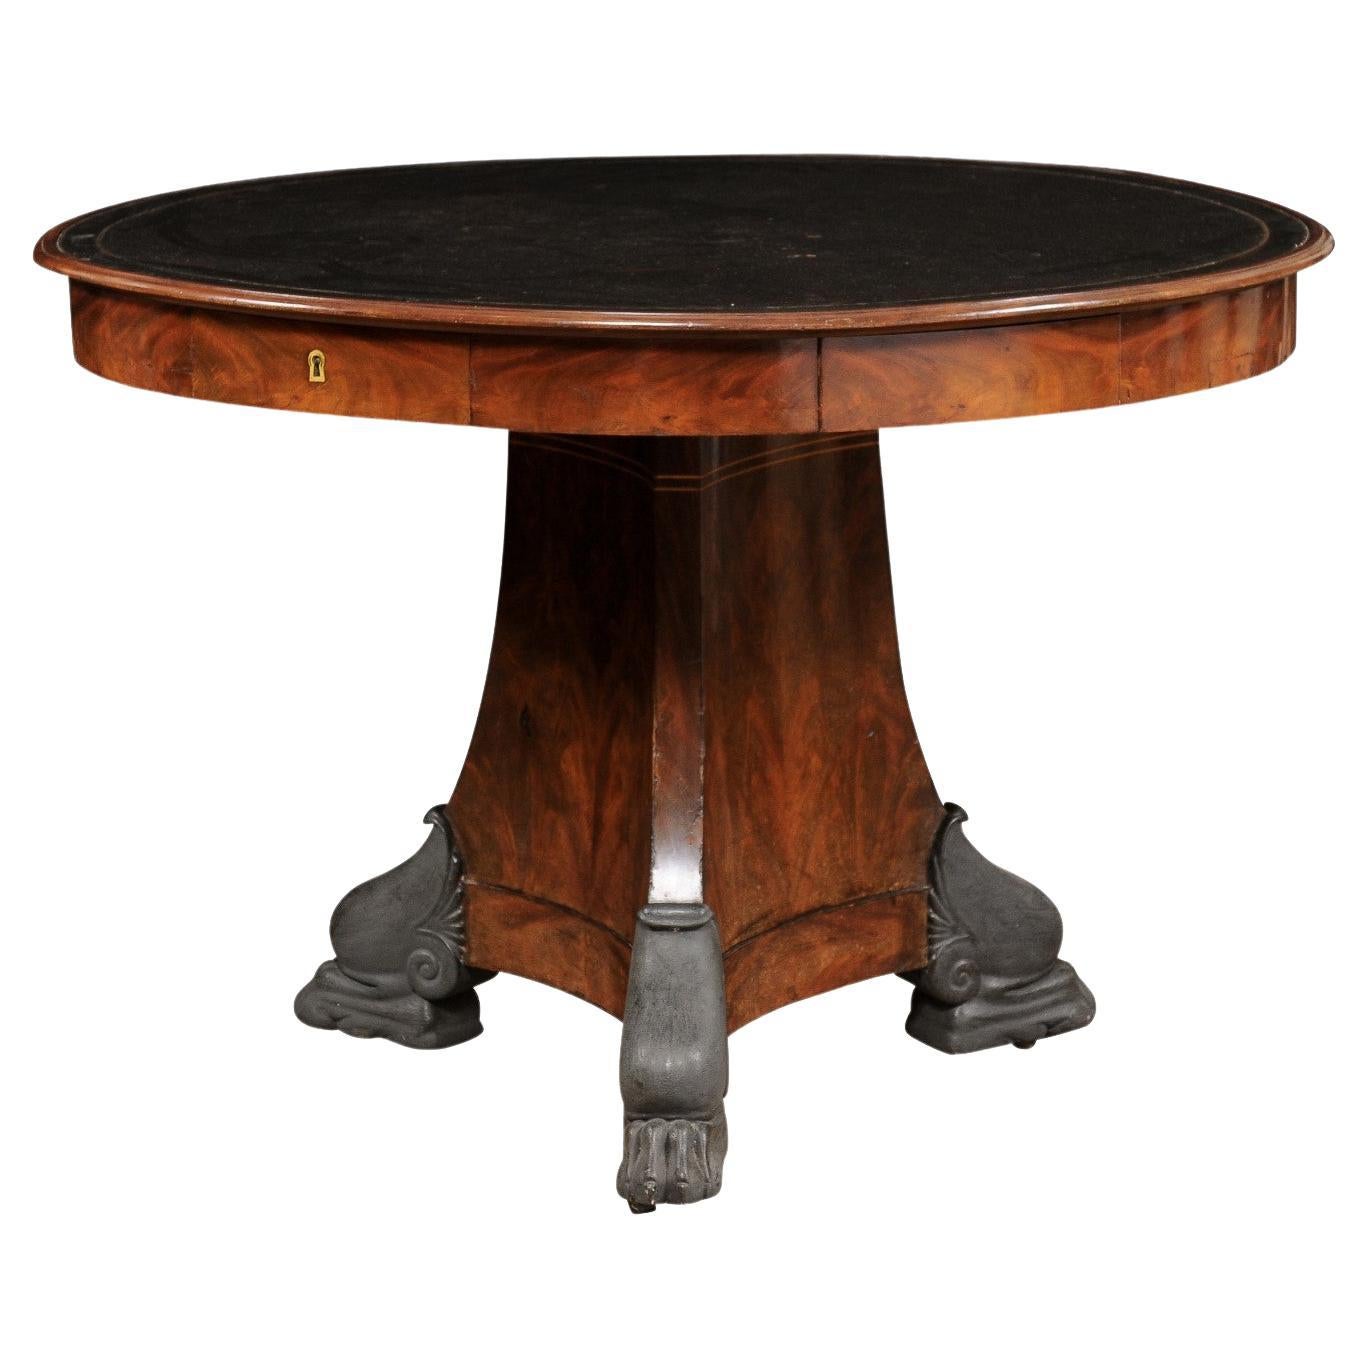 Early 19th Century French Empire Rotating Center Table with Black Leather Top 